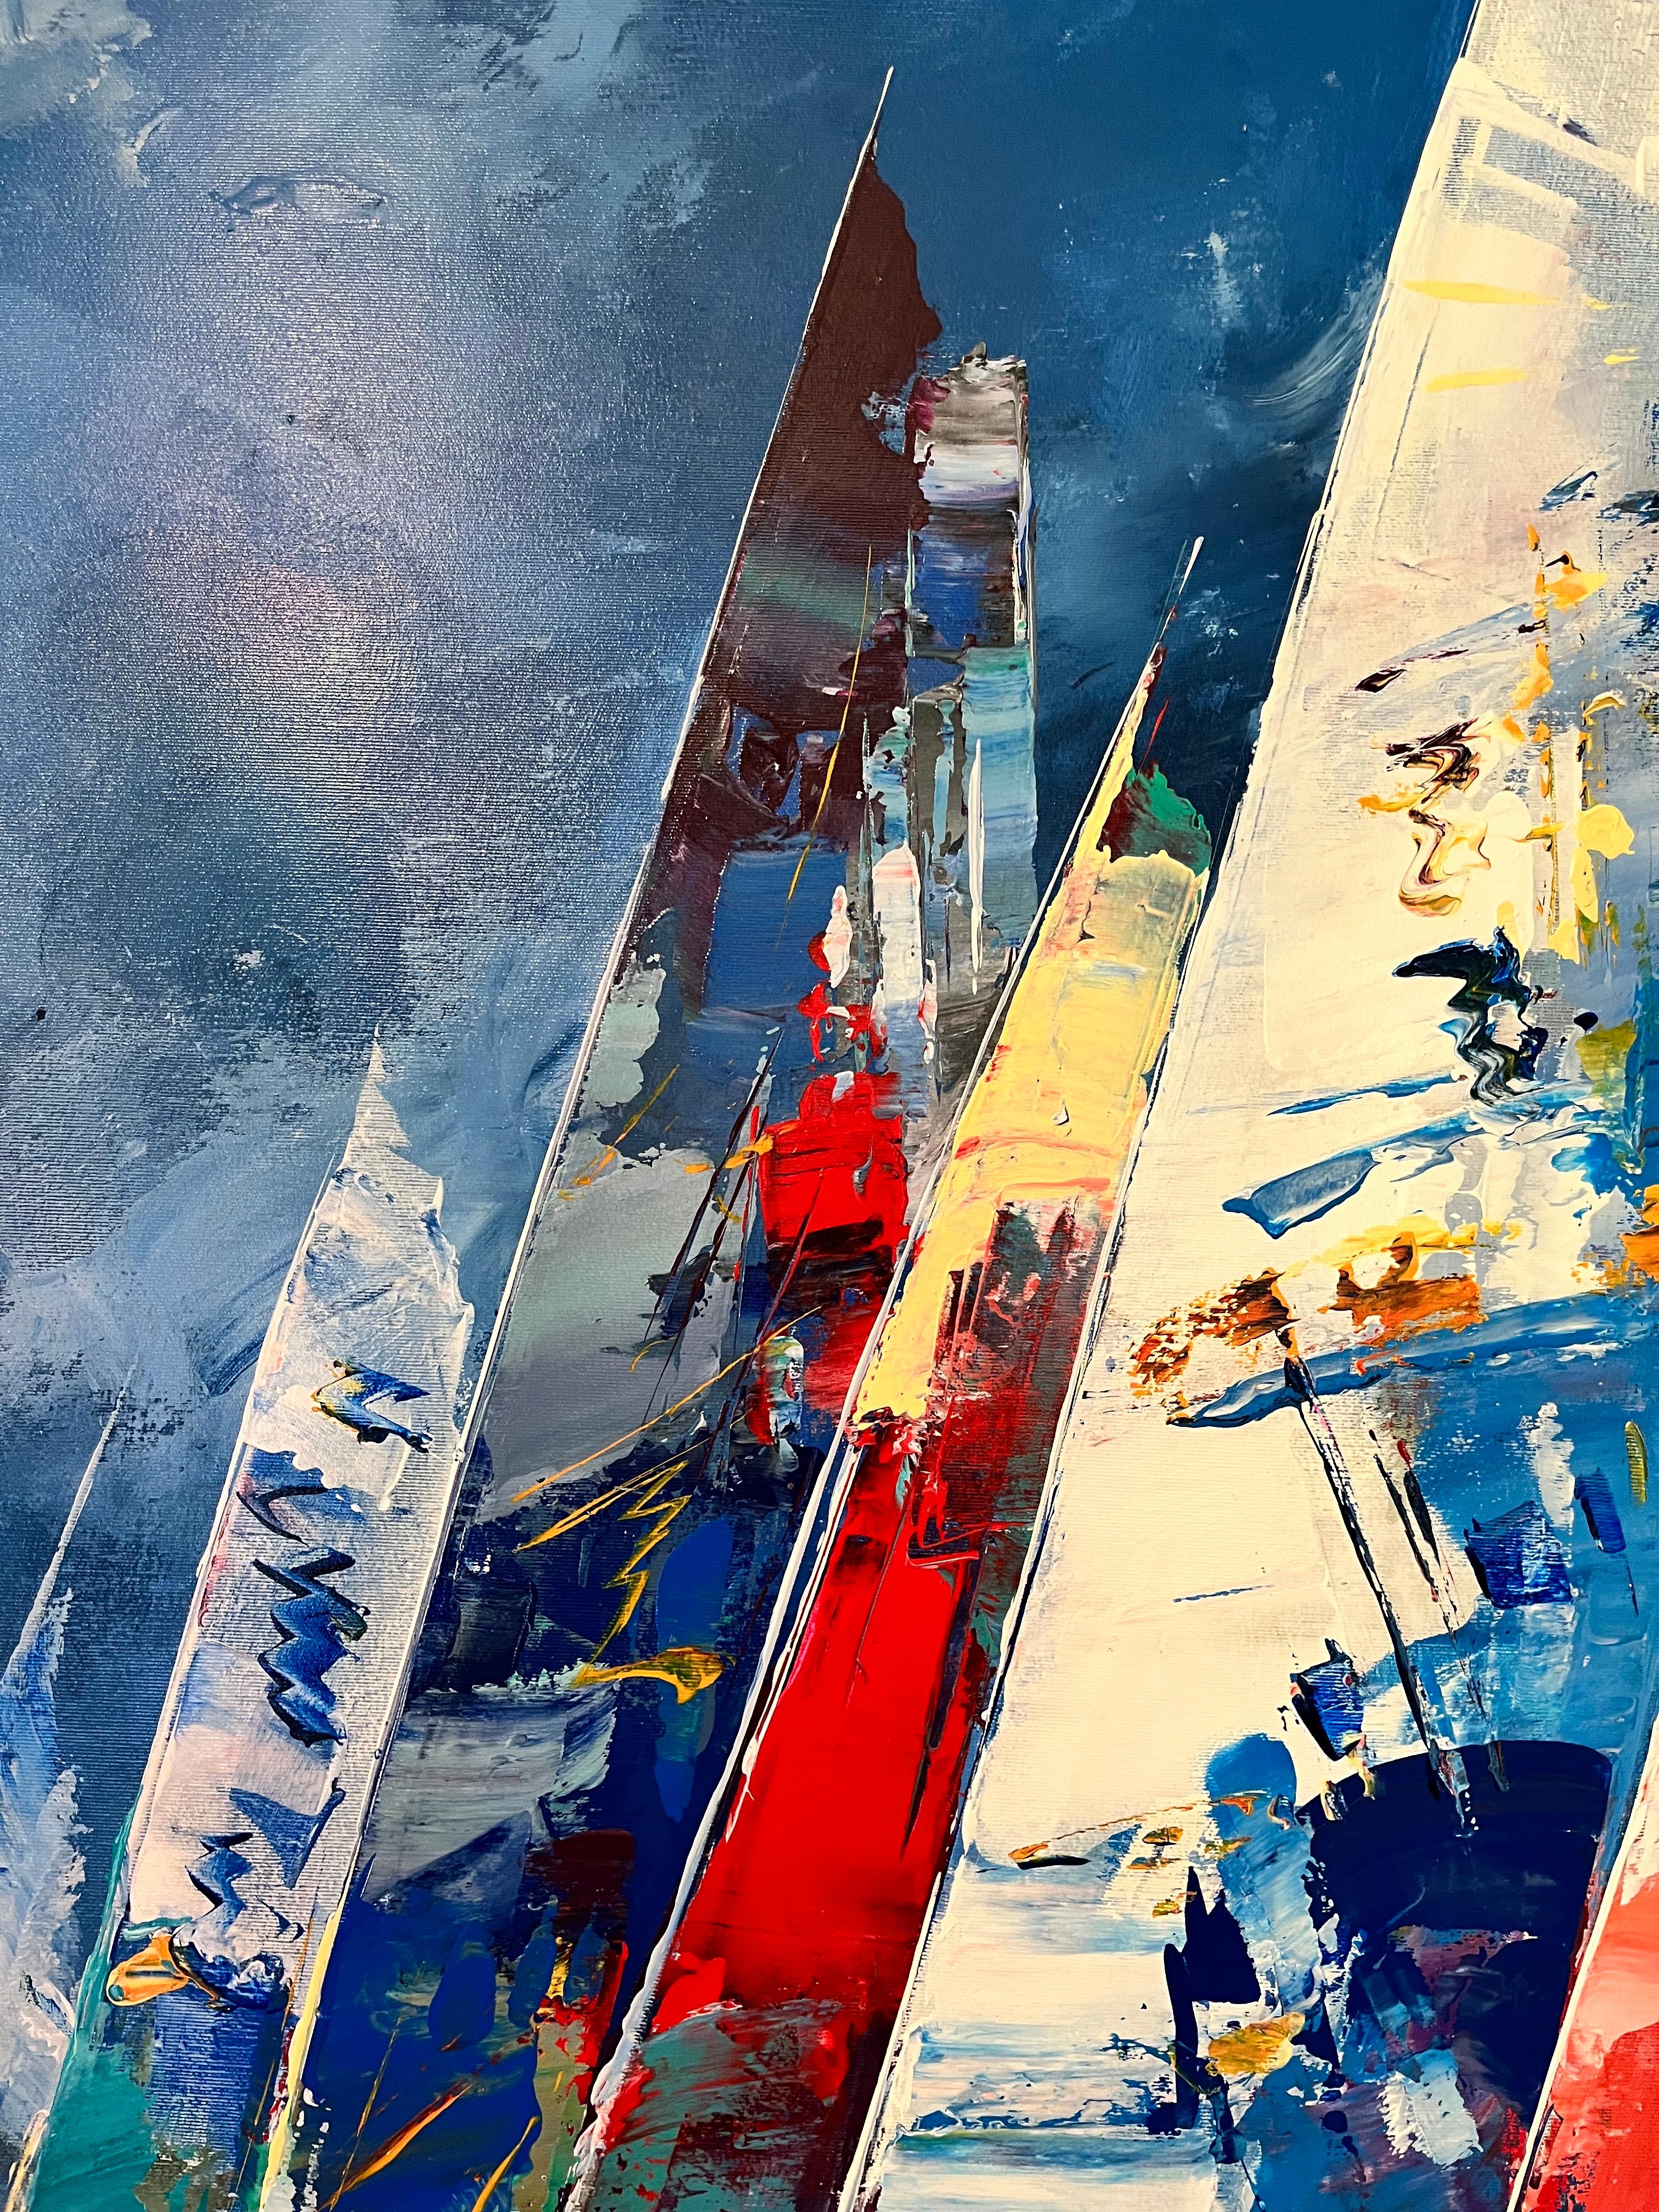 'Ferocious Seas' by Contemporary Spanish artist Bernard. A vibrant and bold painting of sail boats on the open water. Colourful sails of red, green, blue and white make for a work that jumps off the wall, the perfect piece in any interior setting.